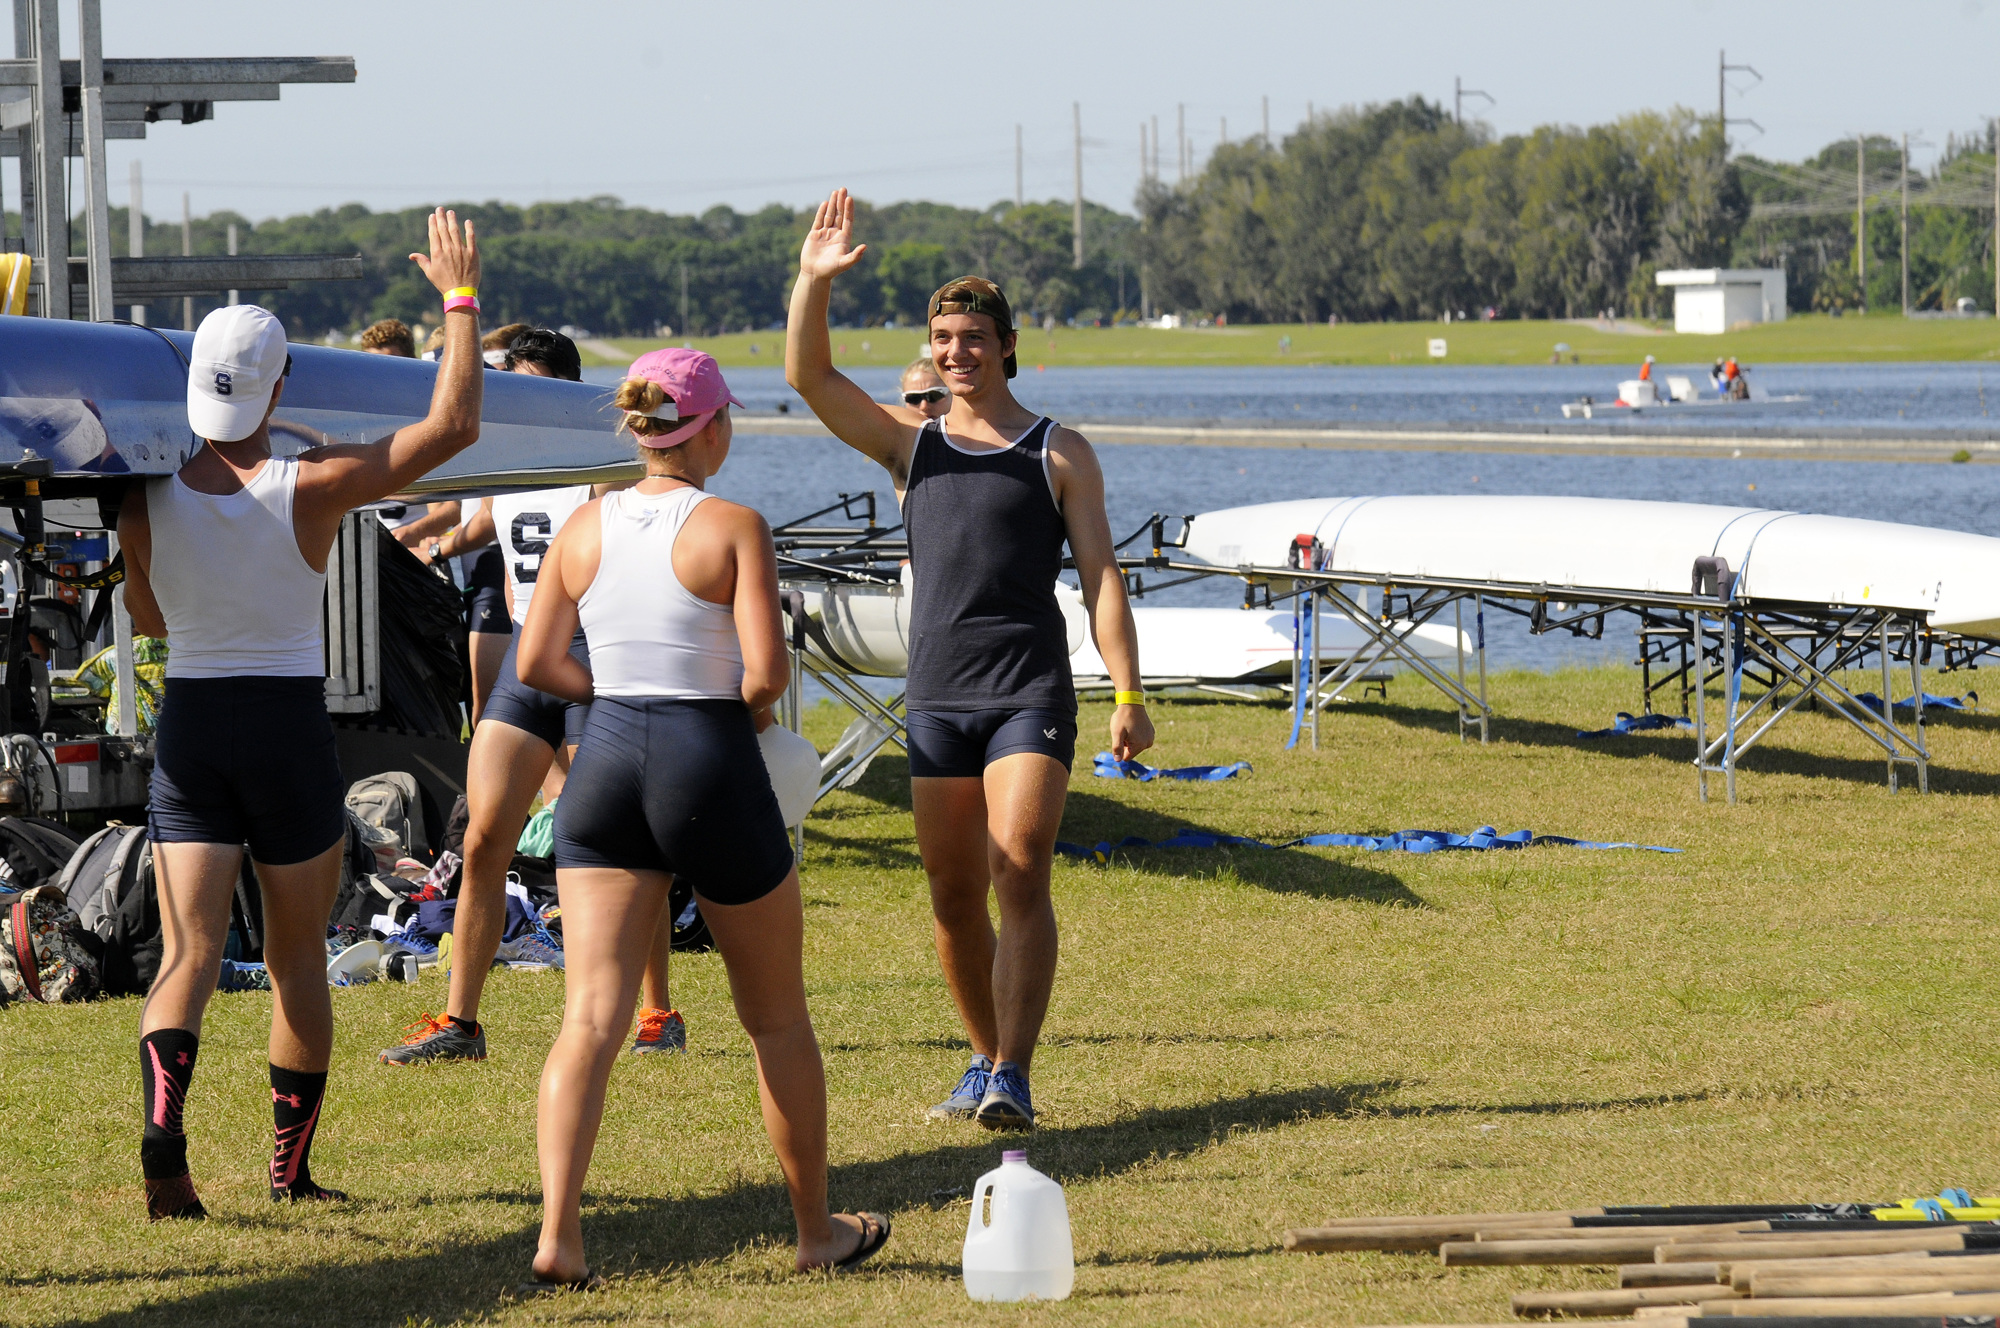 Trey Whitten and Lydia Bremer walk toward the high-fiving Jamie Velez after the Men's Lightweight 4+ race at the SE Championships on May 15. File photo